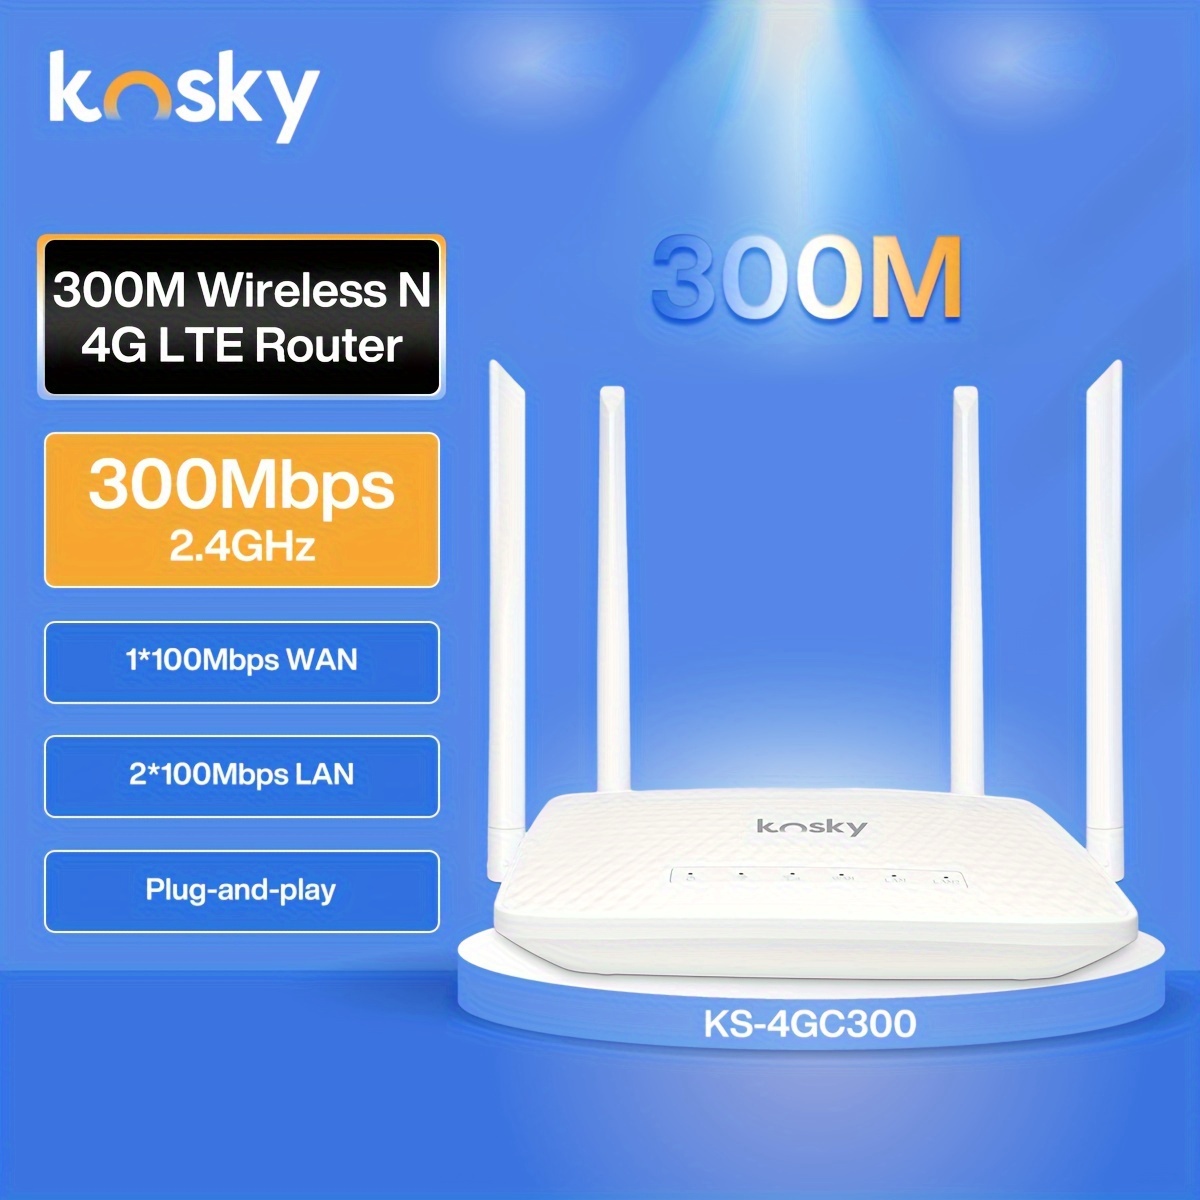 4G Router, 4G Cellular Router, 300Mbps WiFi, 4G LTE Router With SIM Card  Slot, Cat4, 4*5dBi High Gain Antennas, 39.37*3937.01inch  WAN+78.74*3937.01inch LAN For Home & SOHO, US Version